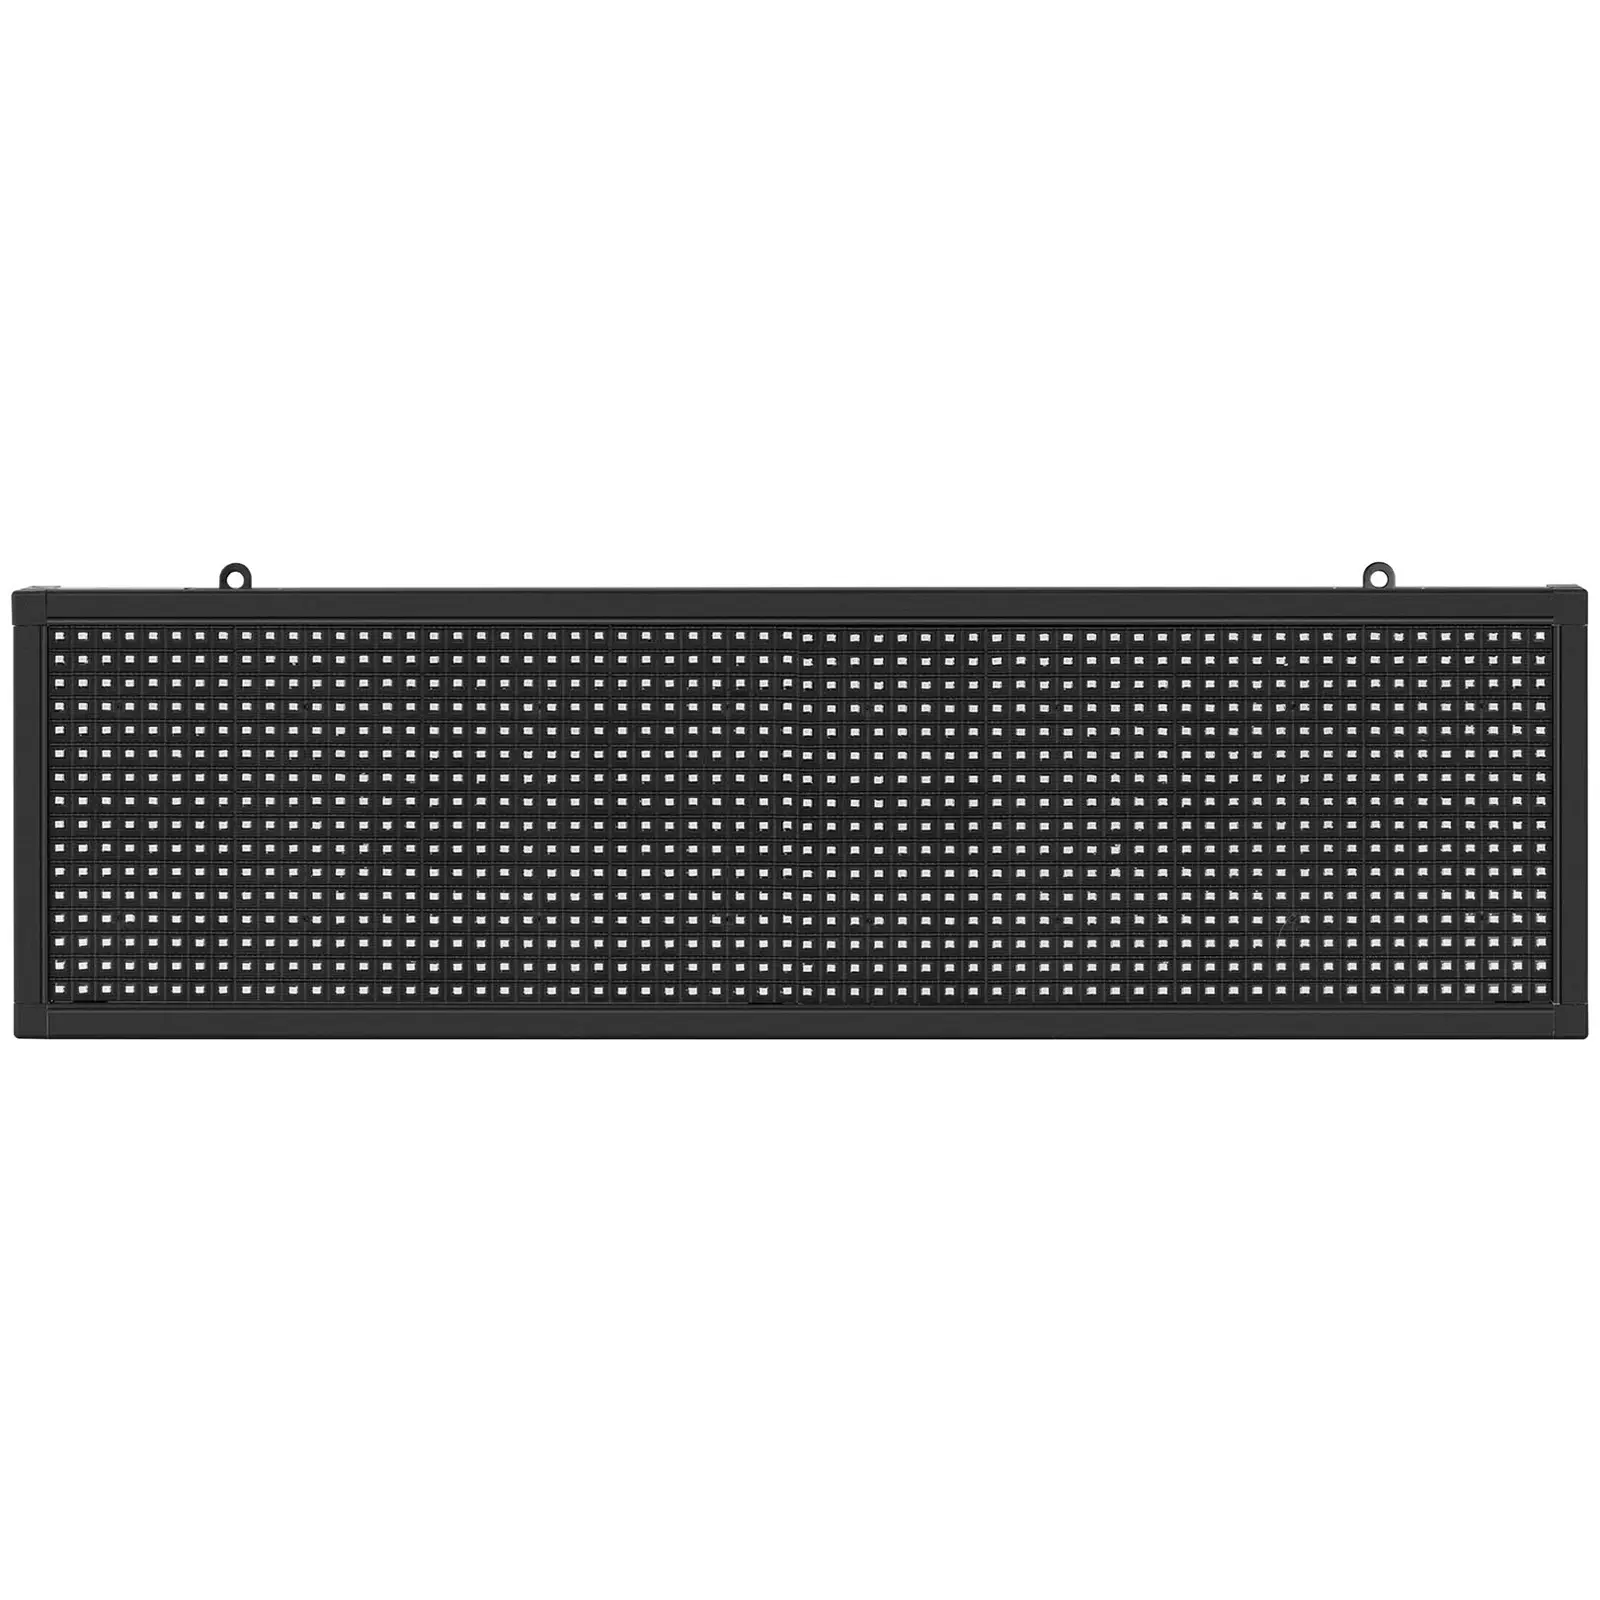 LED-Laufschrift - 64 x 16 rote LED - 67 x 19 cm - programmierbar via iOS / Android - 2